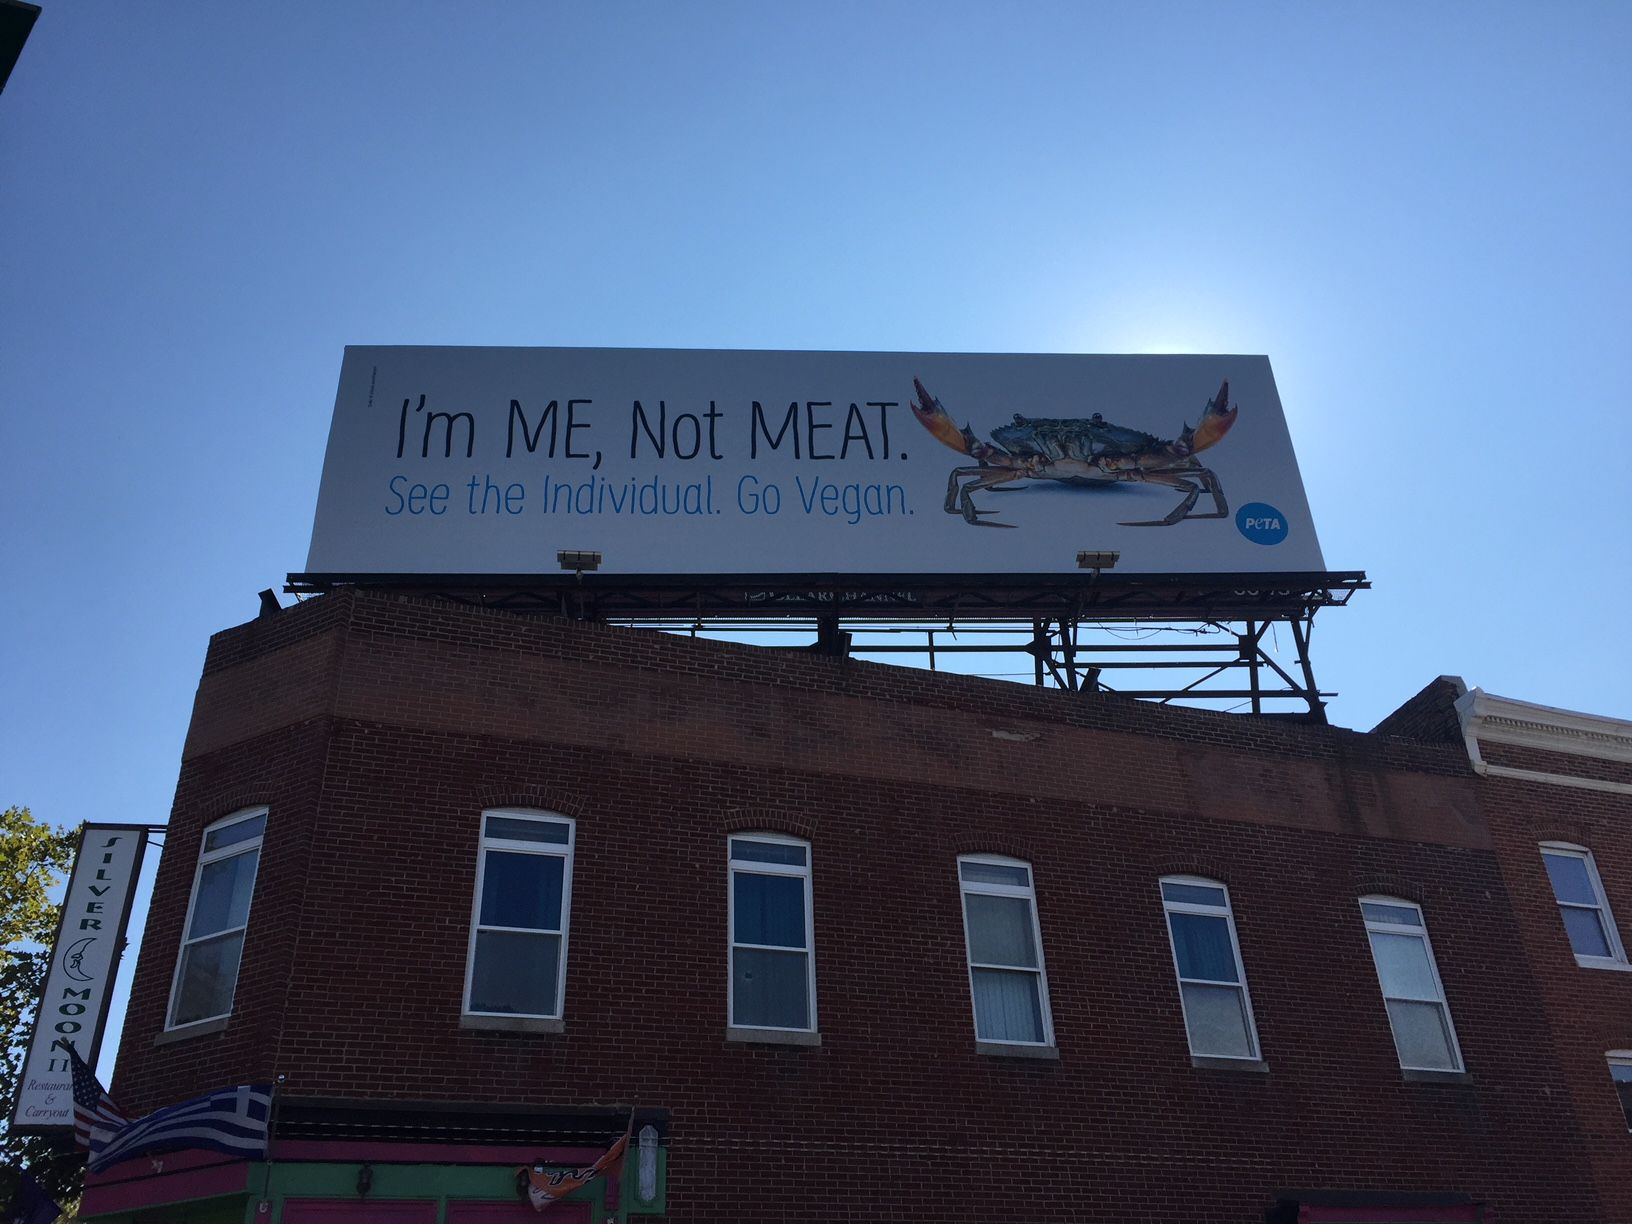 PETA billboard gets a crabby reaction in Md. - WTOP News